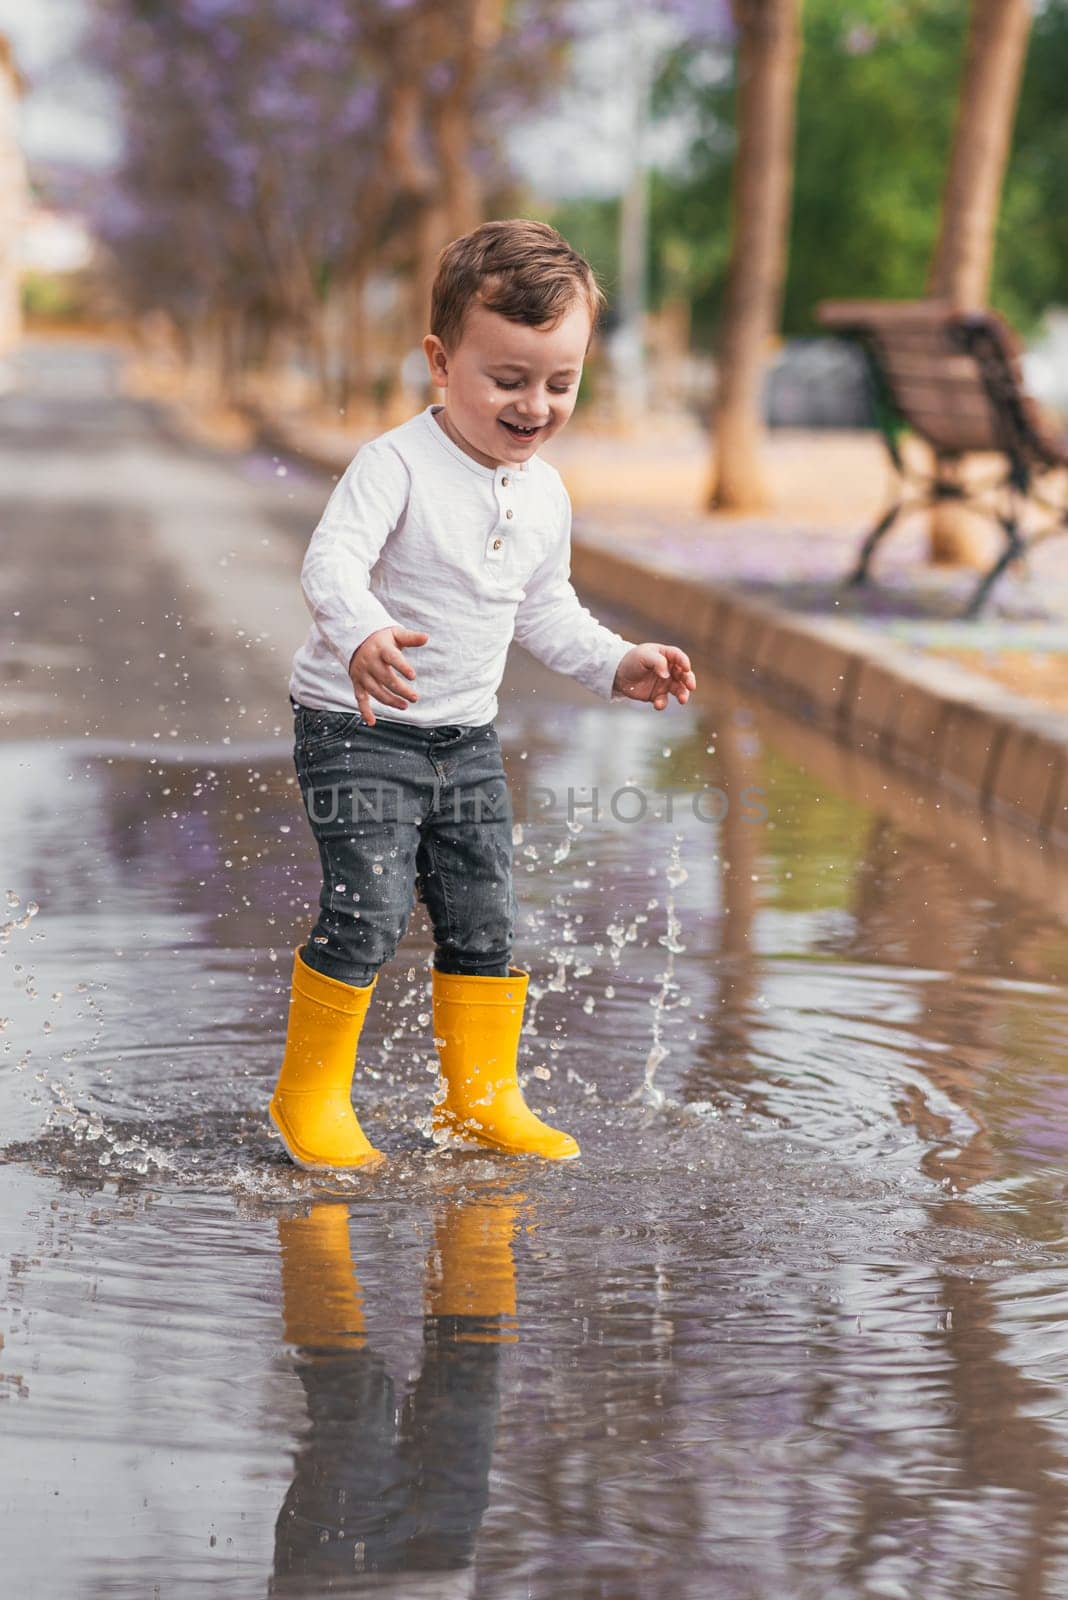 boy in yellow rubber boots jumping over a puddle in the rain.